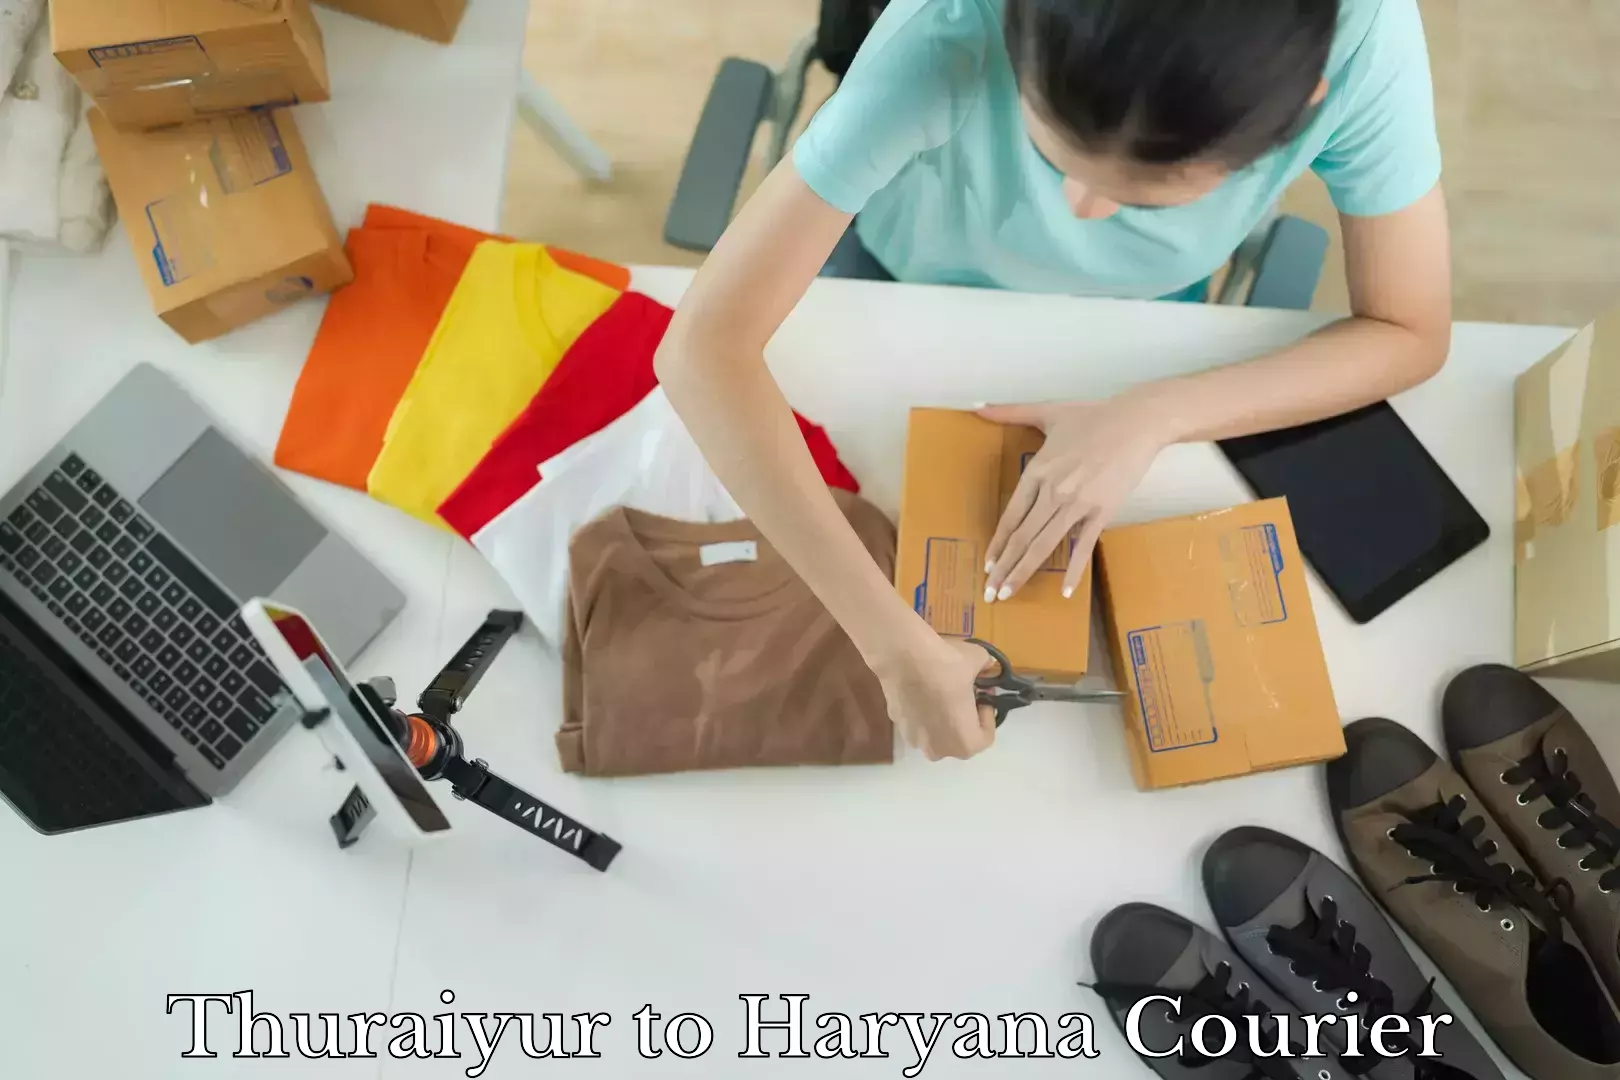 User-friendly delivery service Thuraiyur to Haryana